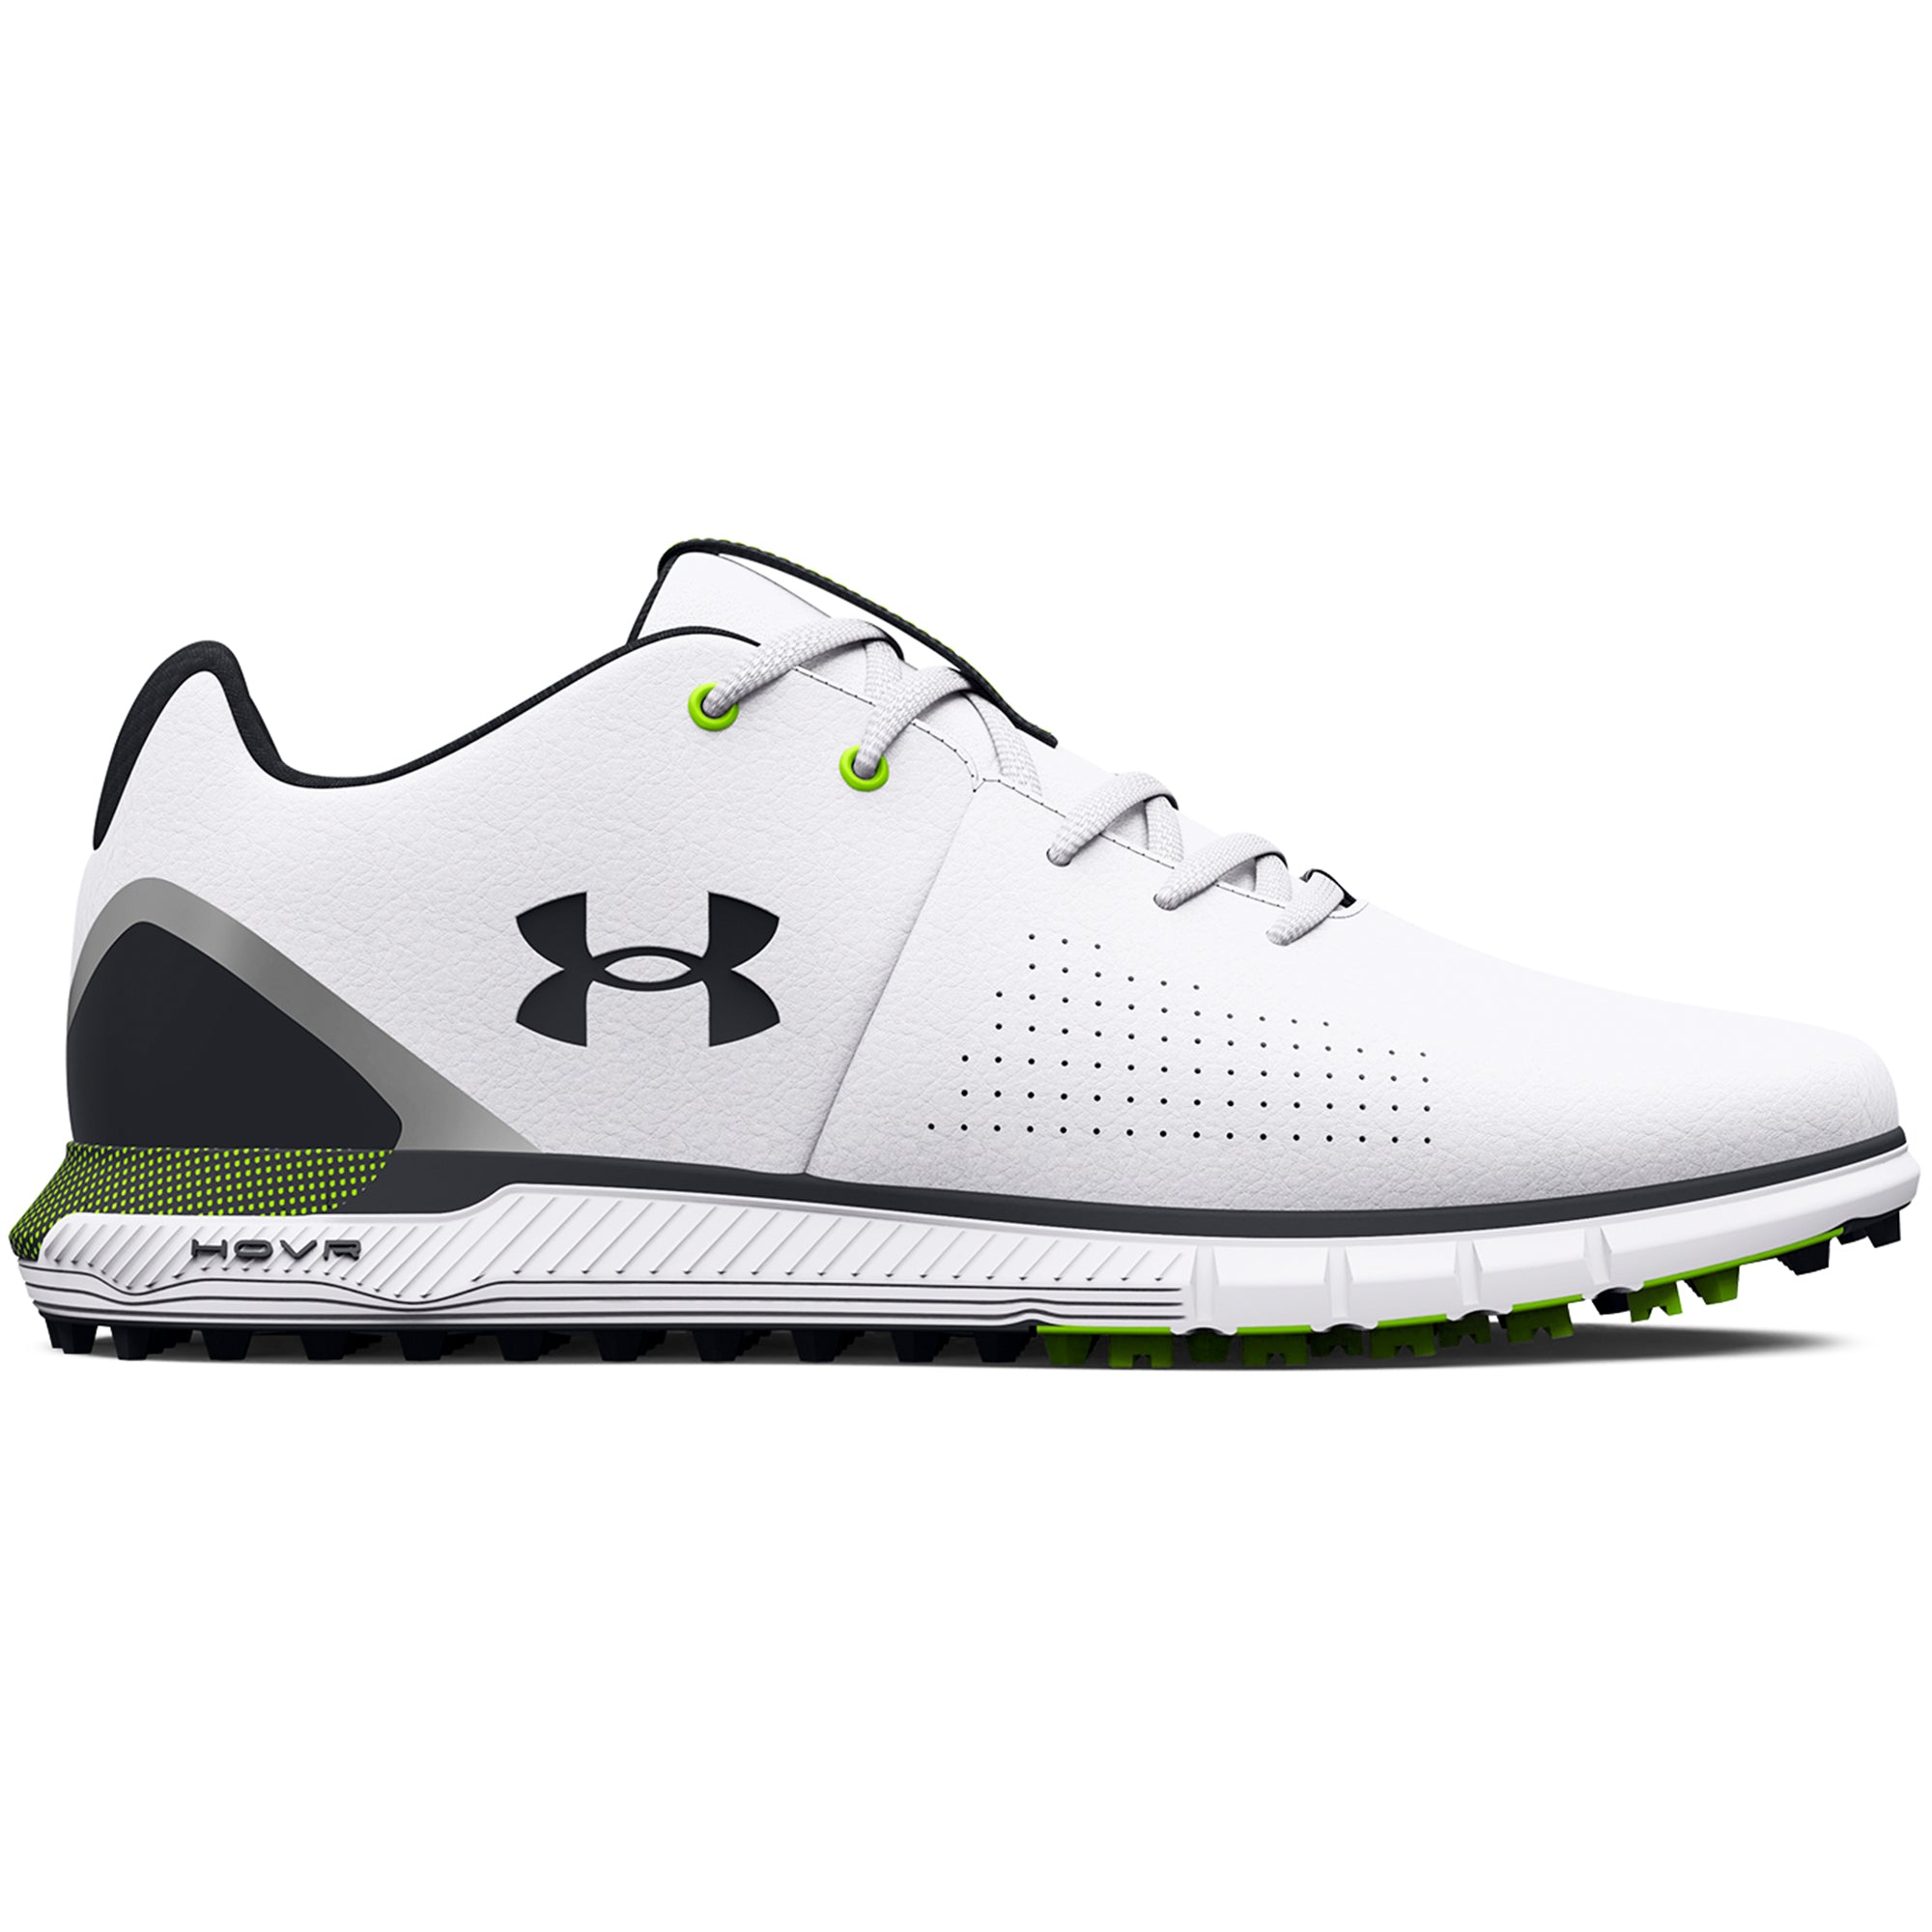 medley Aan het water lood Under Armour HOVR Fade SL 2 E Golf Shoes 3026970 White Black 102 |  Function18 | Restrictedgs